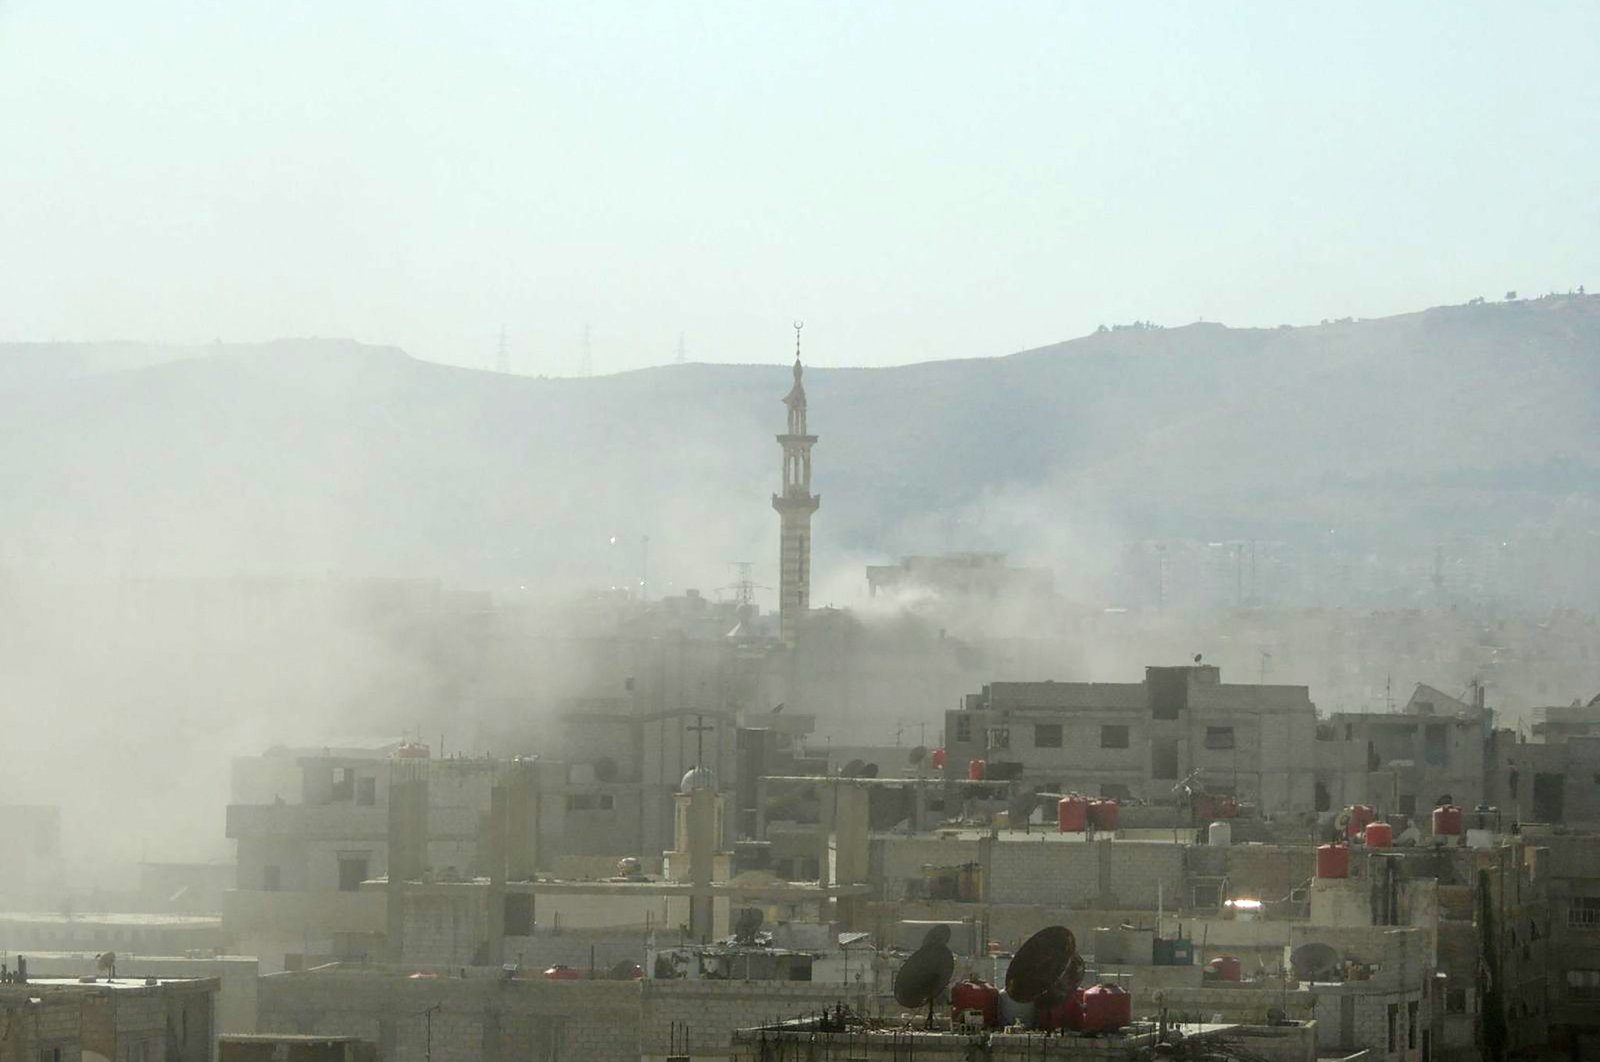 Smoke is seen above buildings following a toxic gas attack by pro-Assad regime forces in eastern Ghouta, on the outskirts of Damascus, Syria, Aug. 21, 2013. (AFP File Photo)